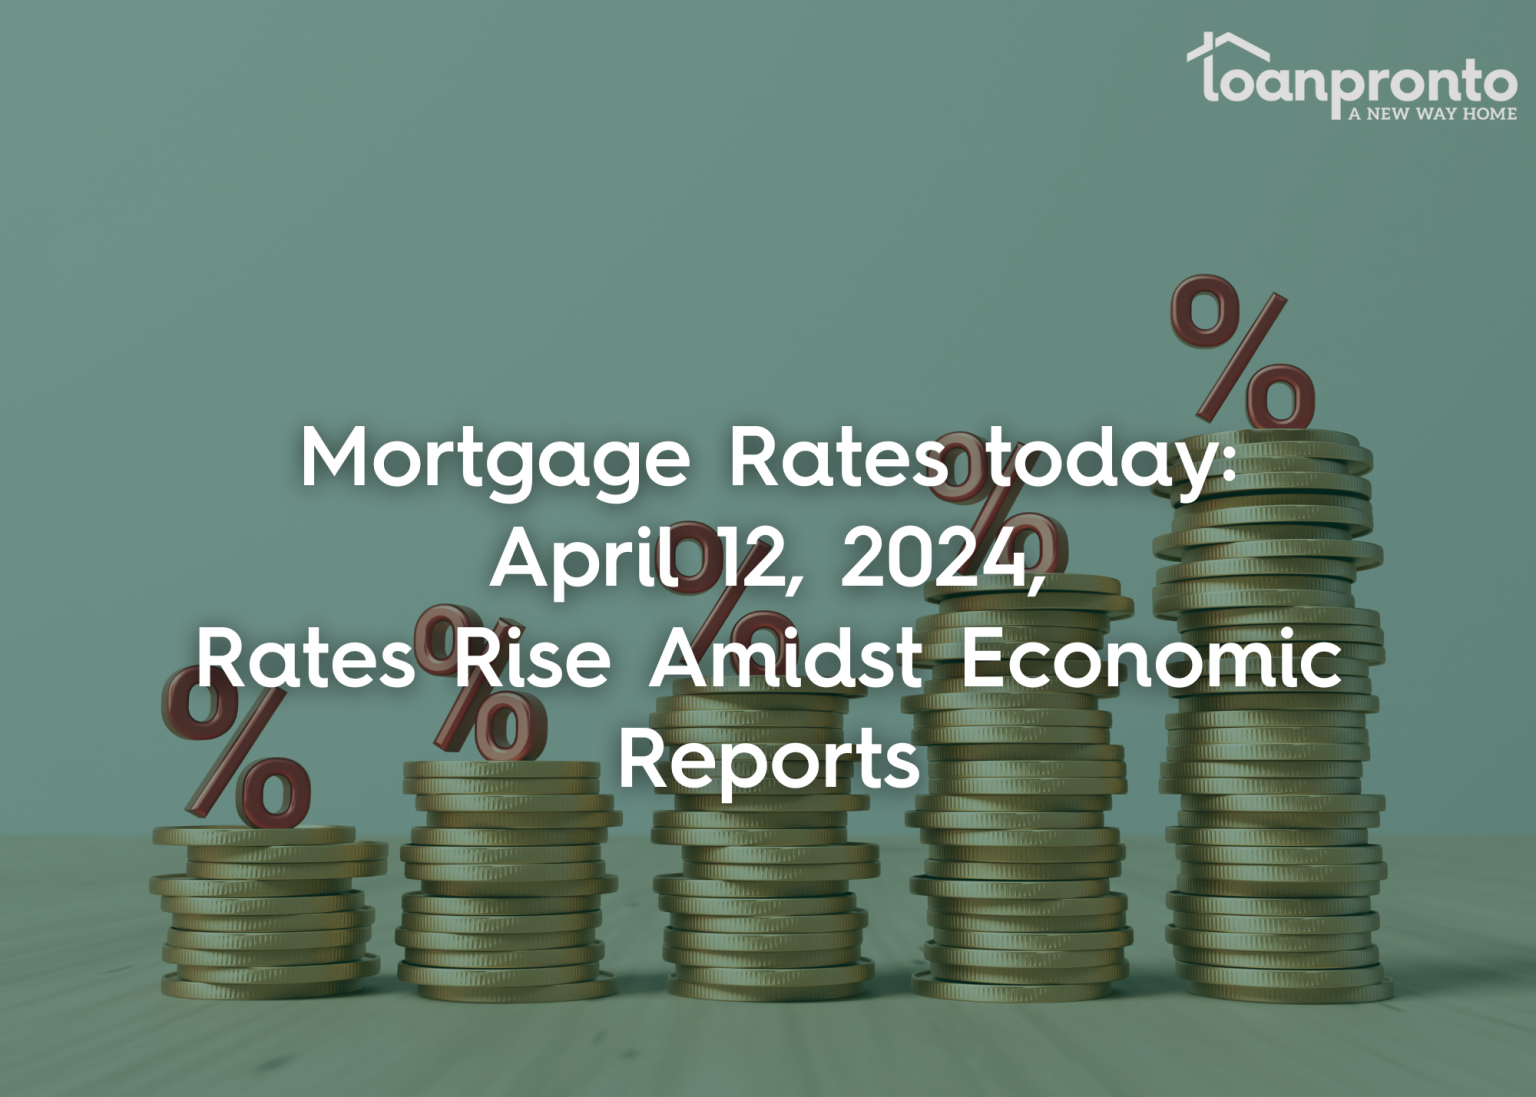 mortgage market shows rates increase based on economic indicators such as CPI report